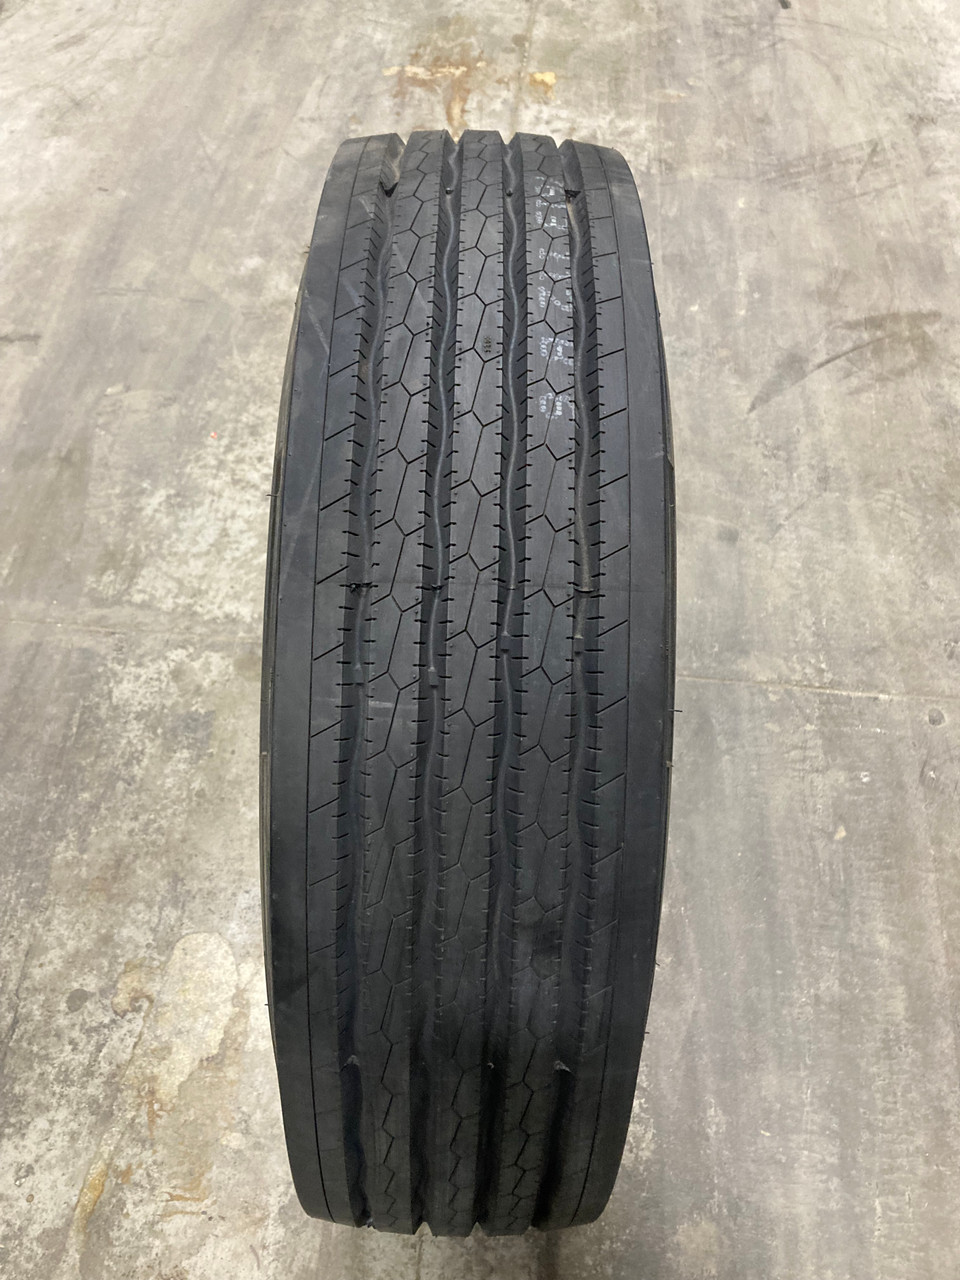 New Tire 235 85 16 Fortune 14 ply All Steel Trailer ST235/85R16